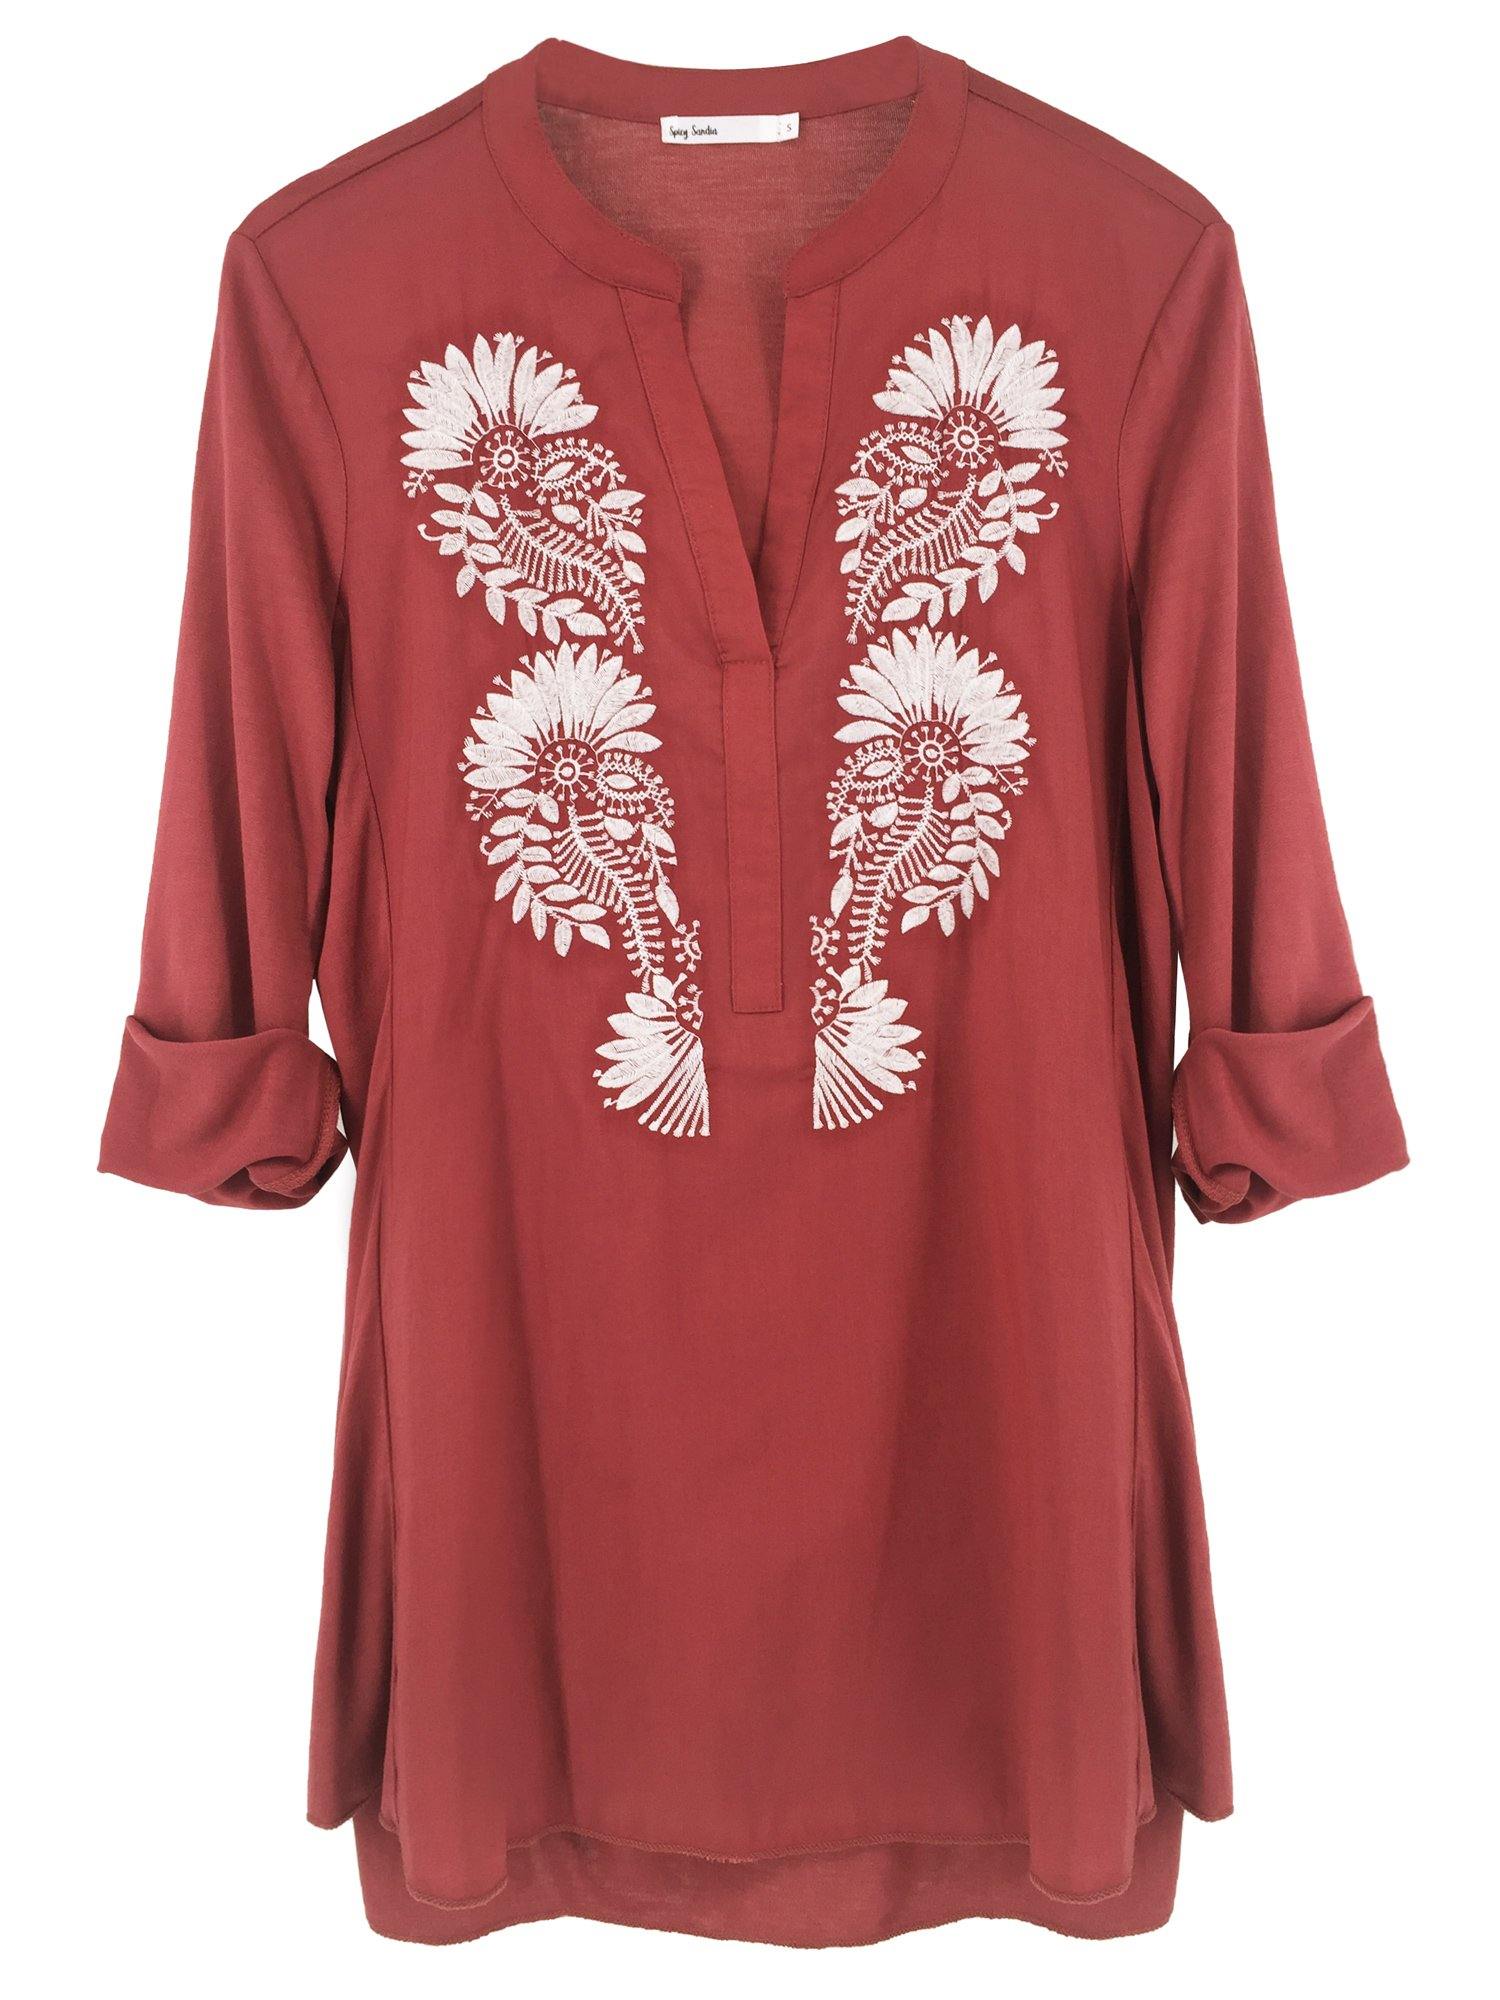 Moss Rose Embroidered Boho Top